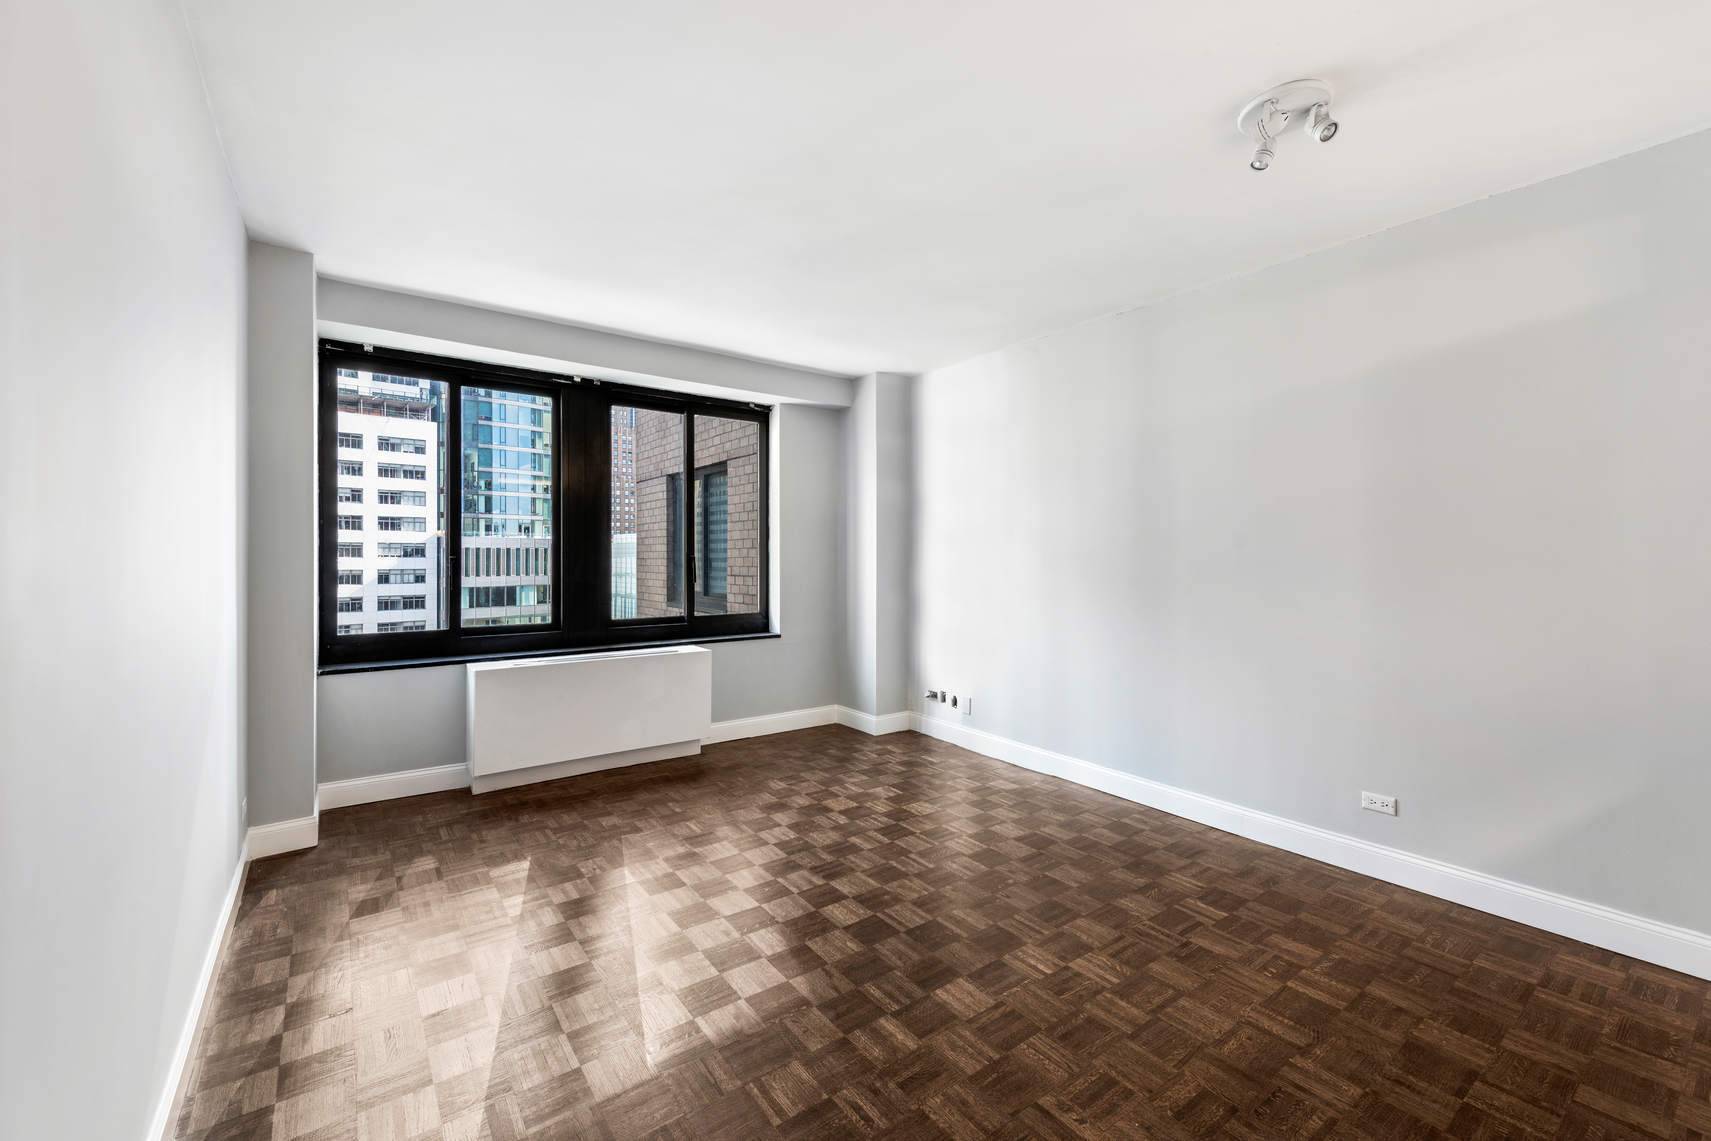 Suburbs in the city ! Welcome home to this spacious, sunny 1BR with hardwood flooring, oversized windows and abundant closet space.